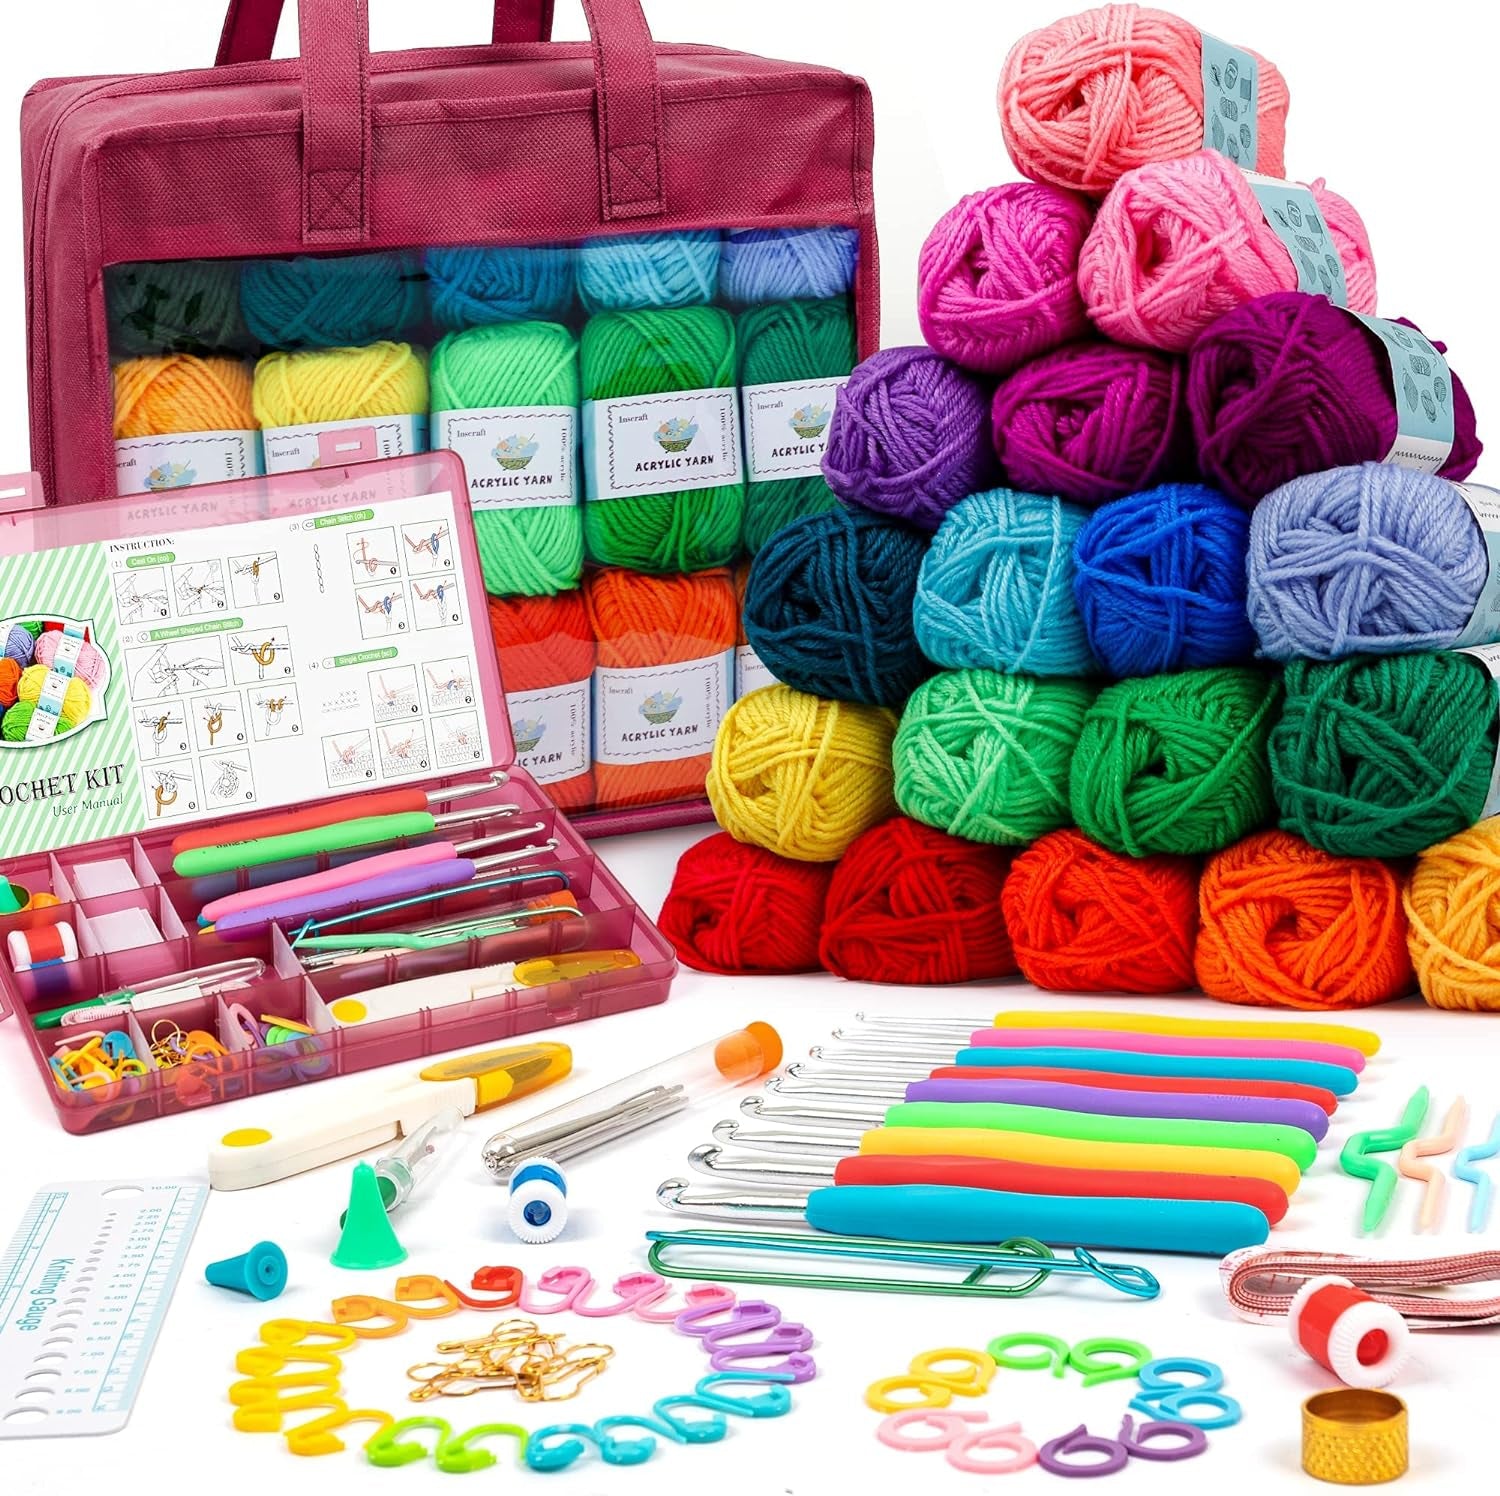 103 PCS Crochet Kit with Crochet Hooks Yarn Set, Premium Bundle Includes 1650 Yards Acrylic Yarn Skeins Balls, Needles, Accessories, Bag, Ideal Starter Pack for Kids Adults Beginner Professionals